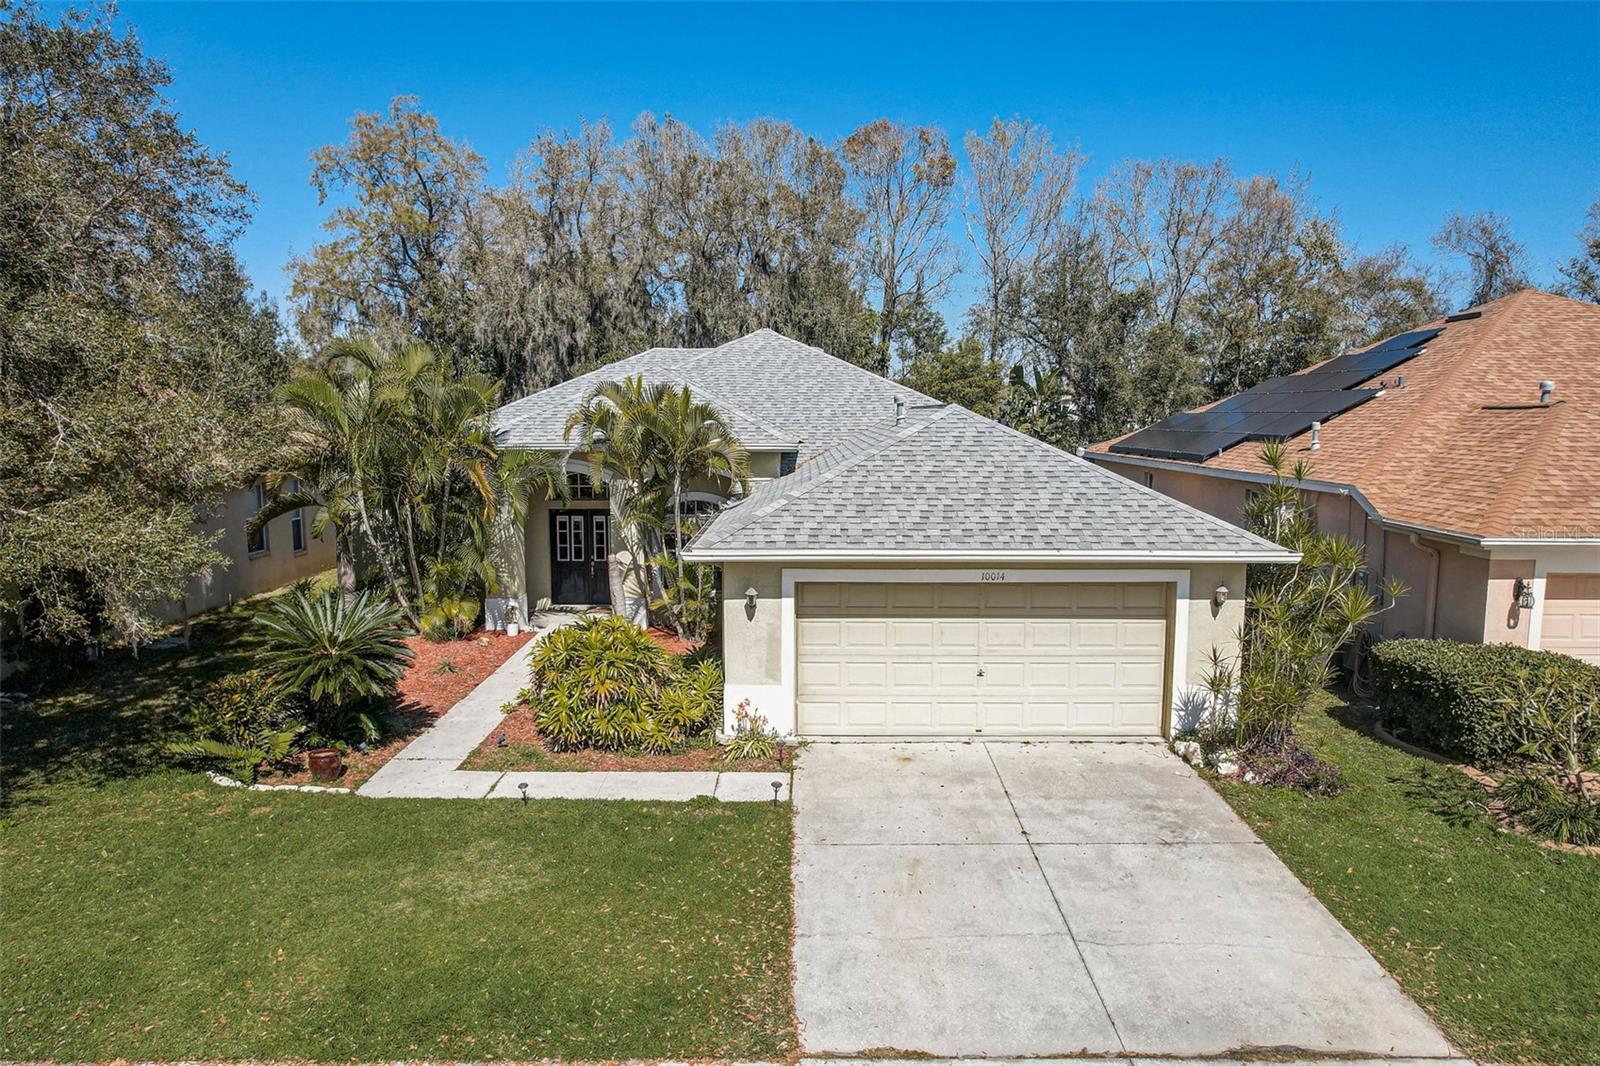 Photo one of 10014 Cannon Dr Riverview FL 33578 | MLS T3505086